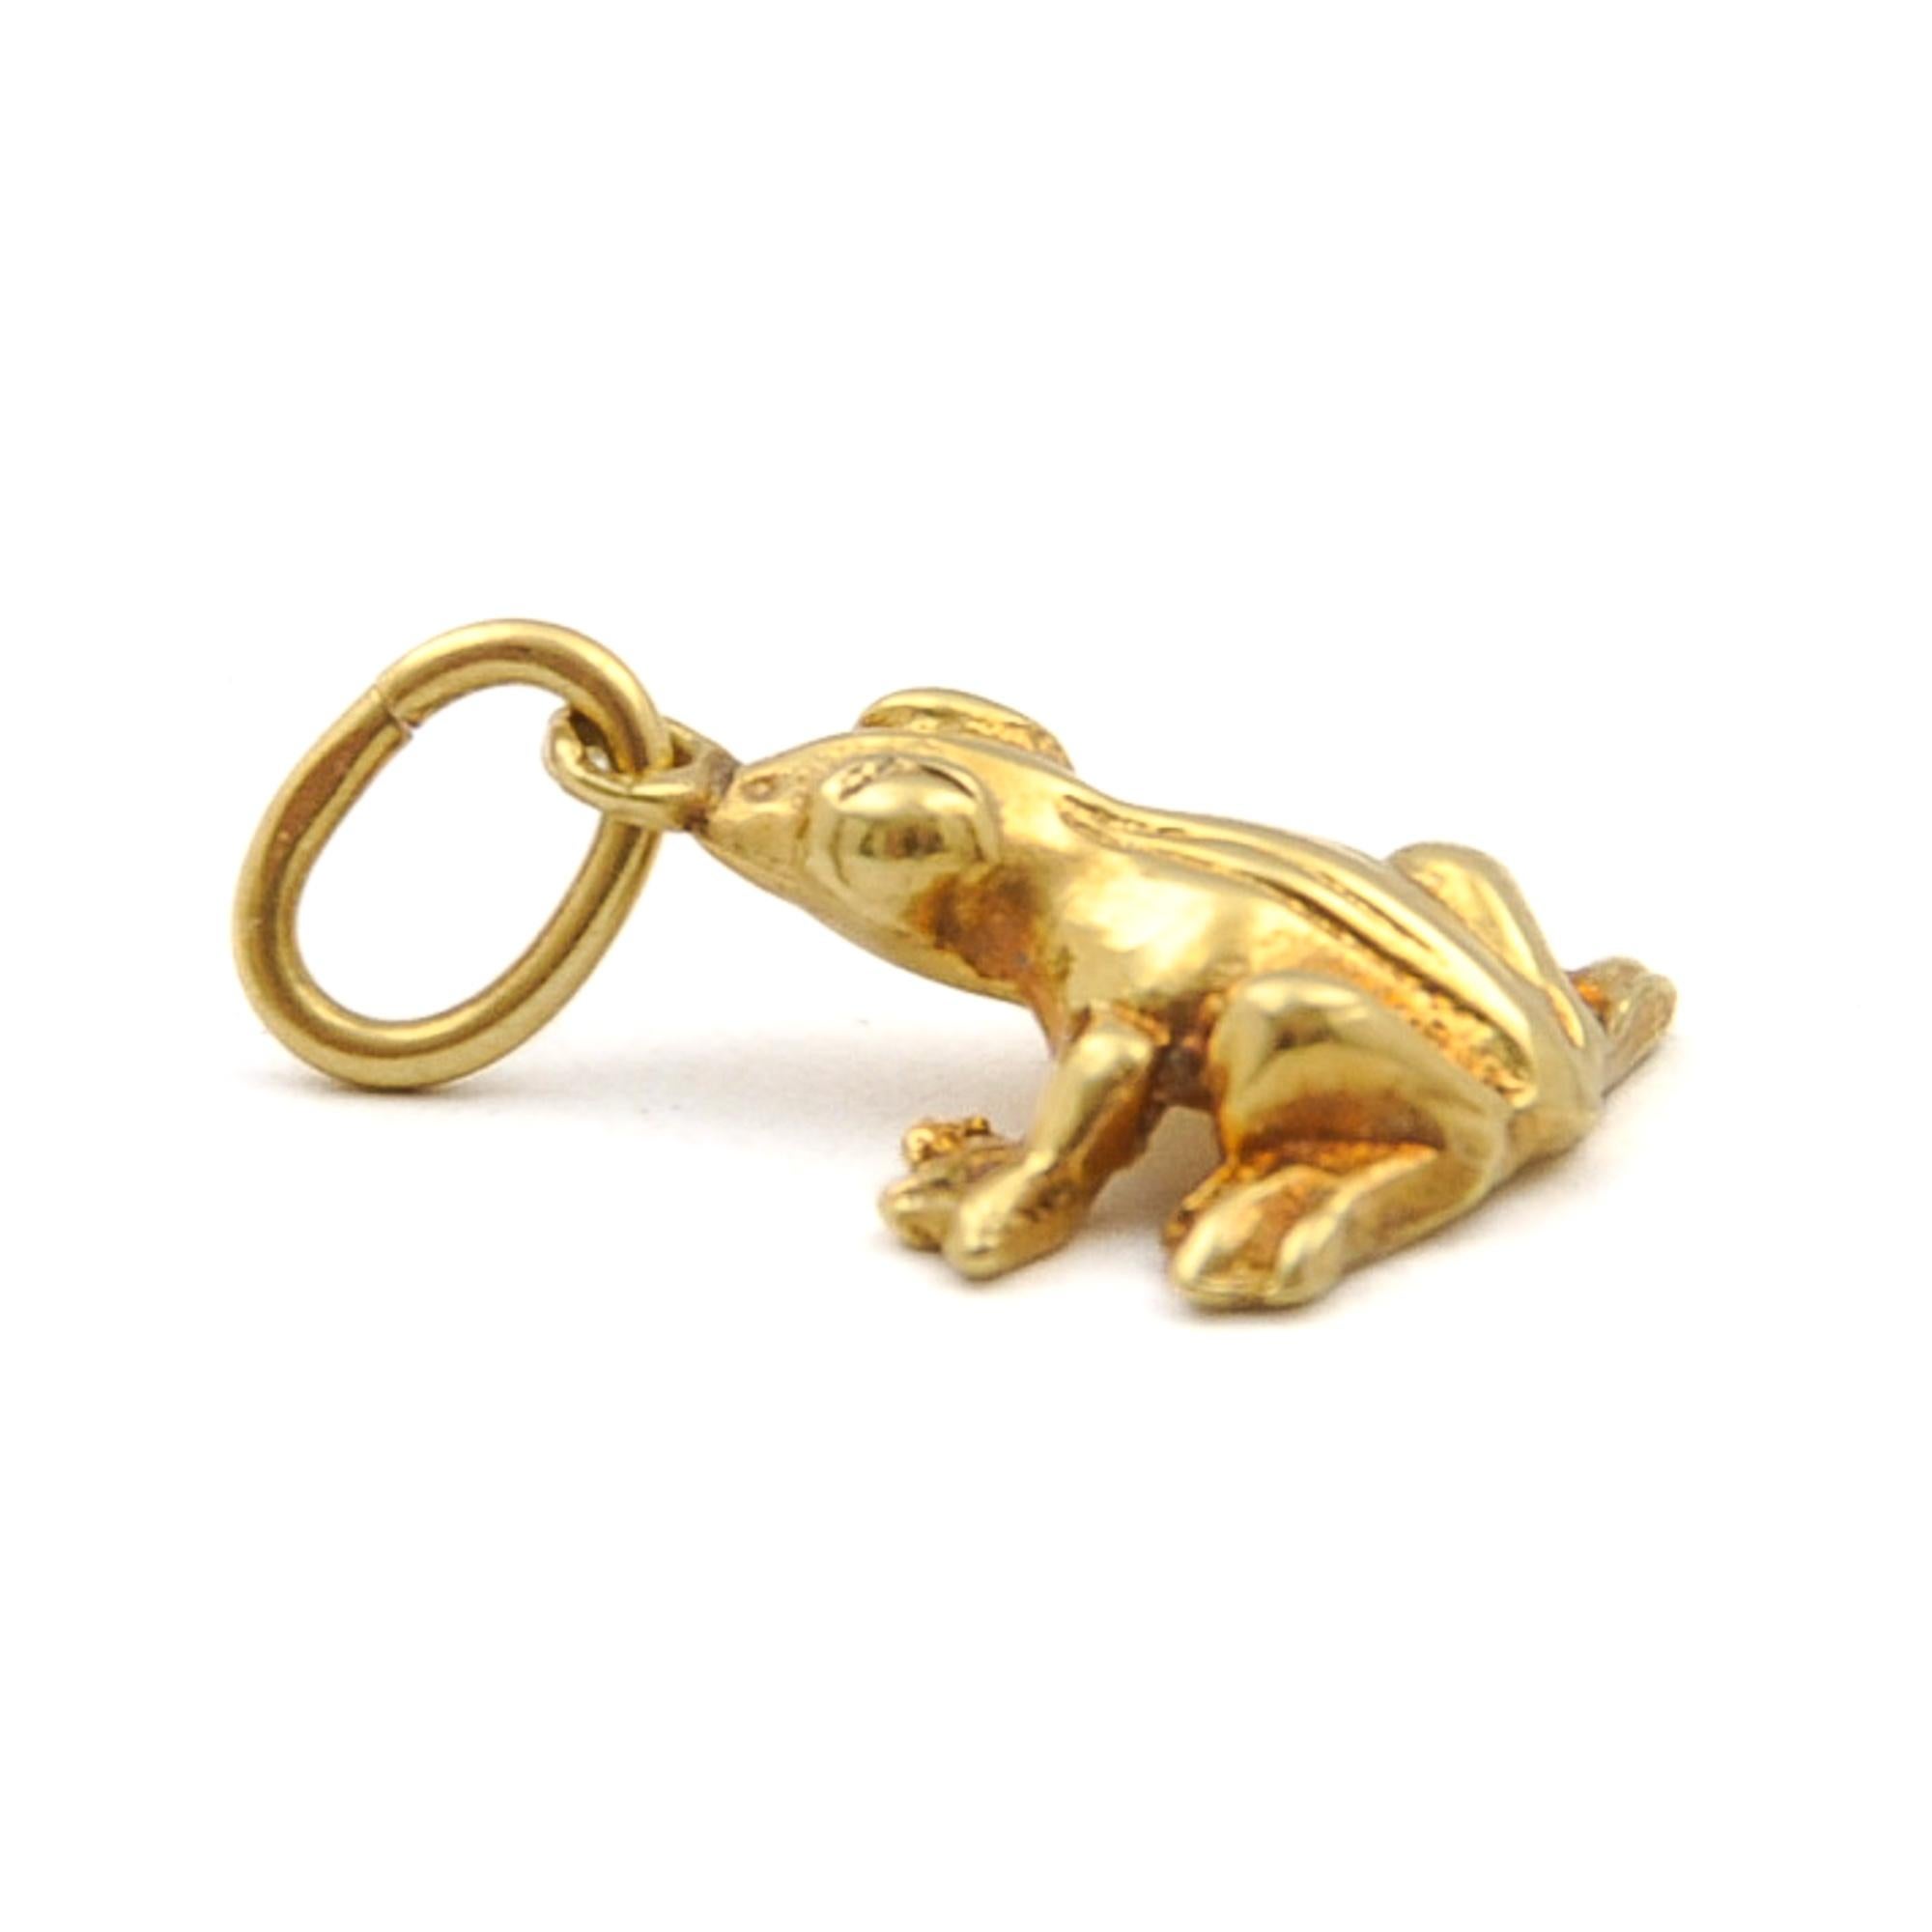 A vintage gold frog charm pendant. This adorable frog has beautiful details. This elegant long legged jumping creature is made in solid 18 karat gold. 

The frog as a spirit animal reminds us of the transience of our lives. As a symbol of transition